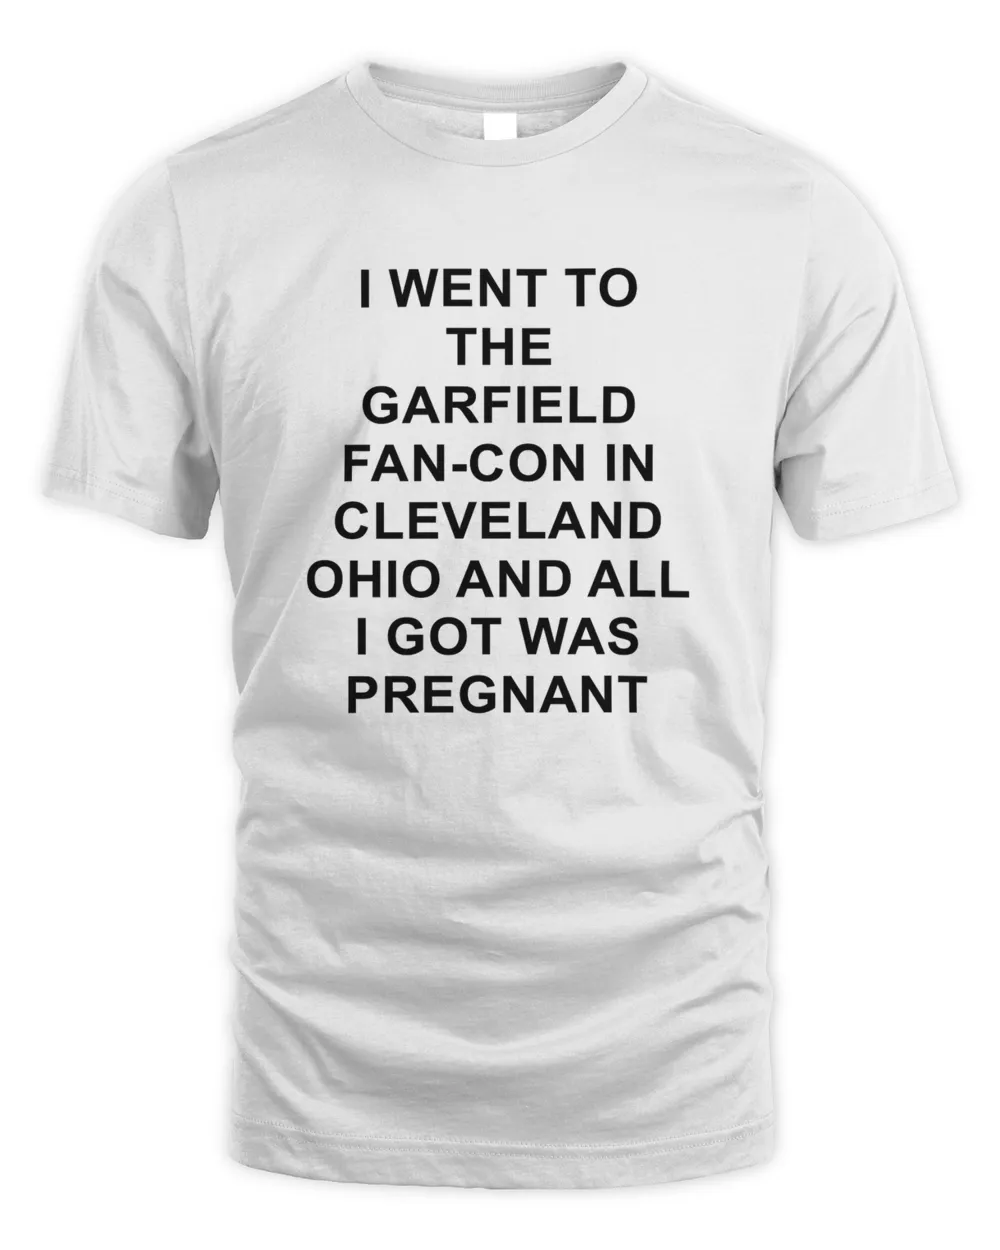 I Went To The Garfield Fan-Con In Cleveland Ohio And All I Got Was Pregnant Tee